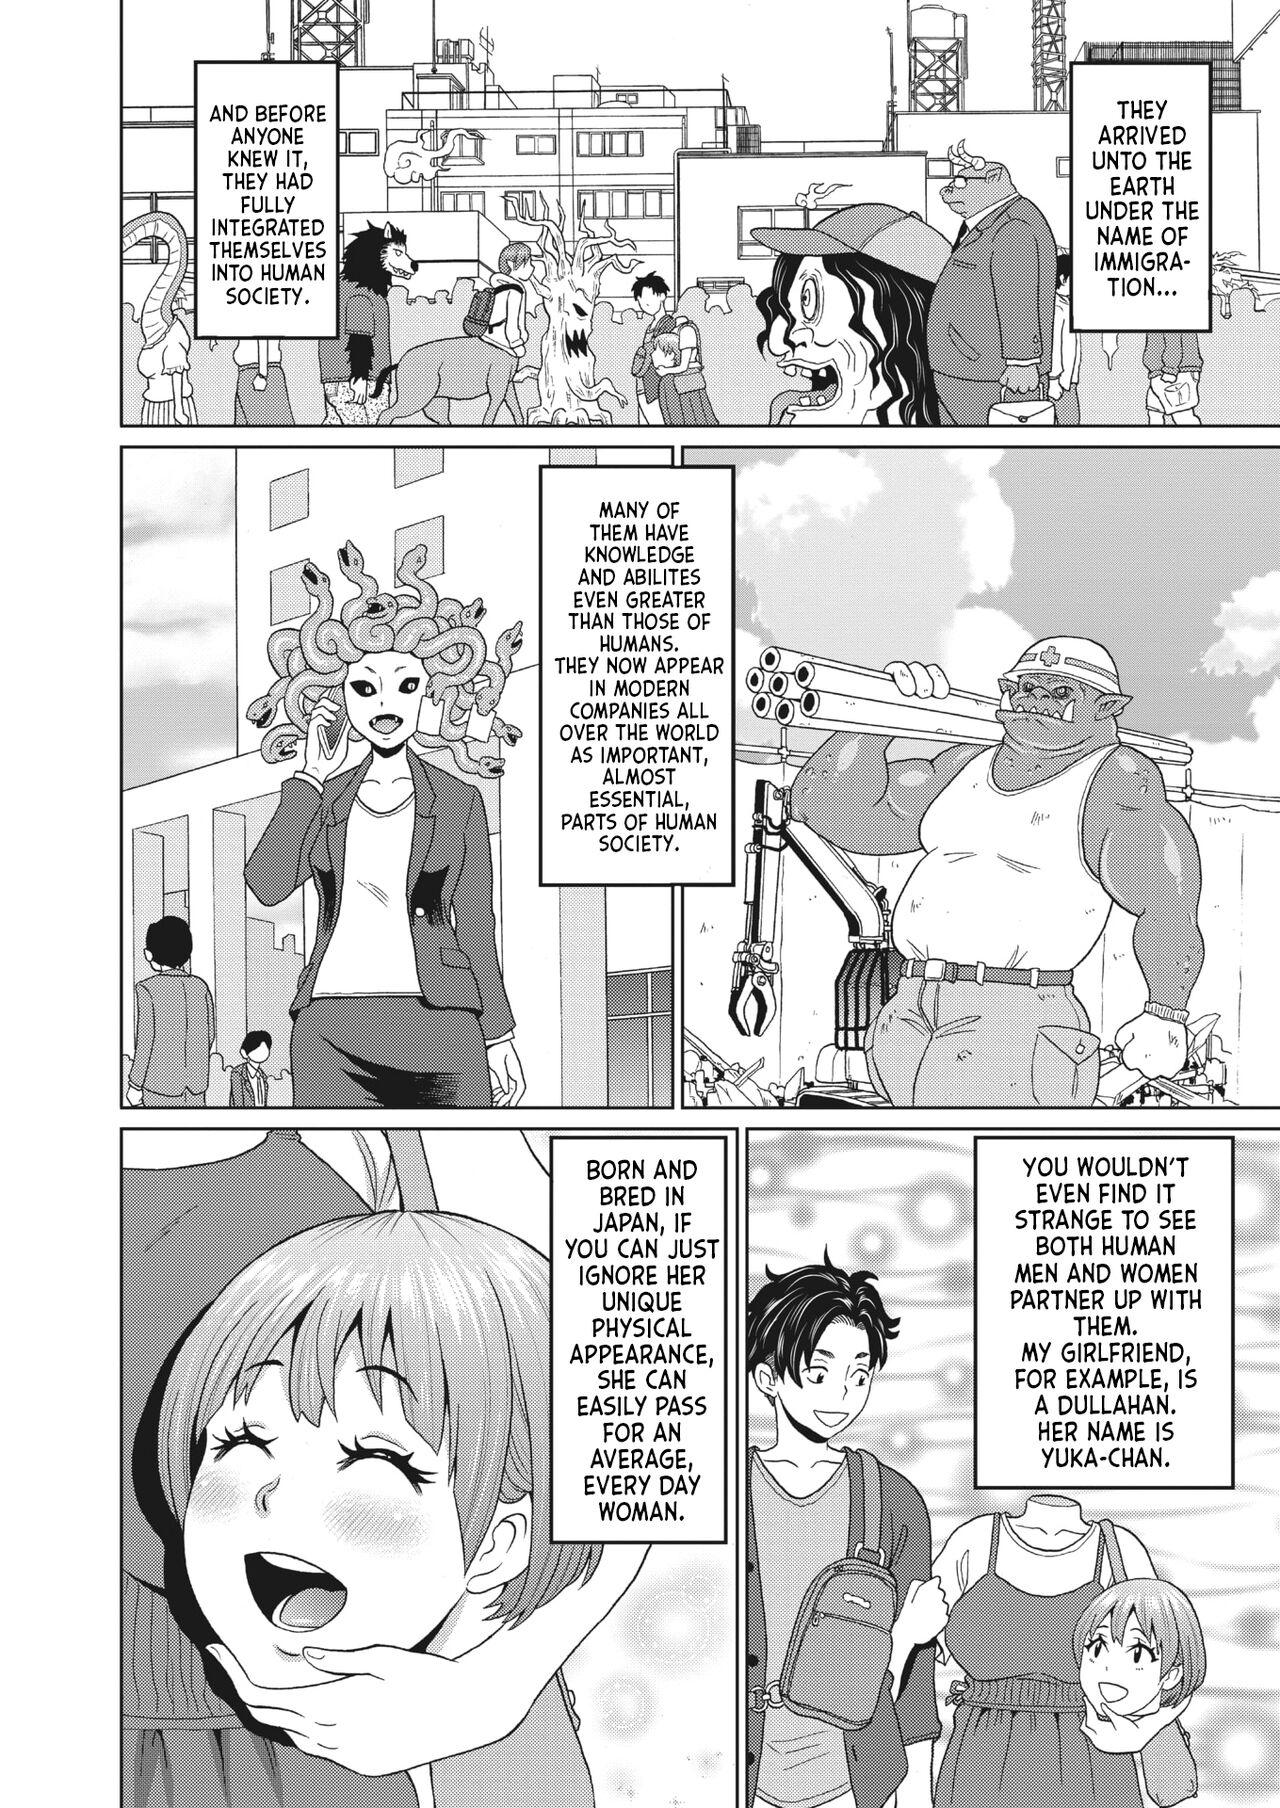 Gay Sex My Dullahan Girlfriend Con - Page 2